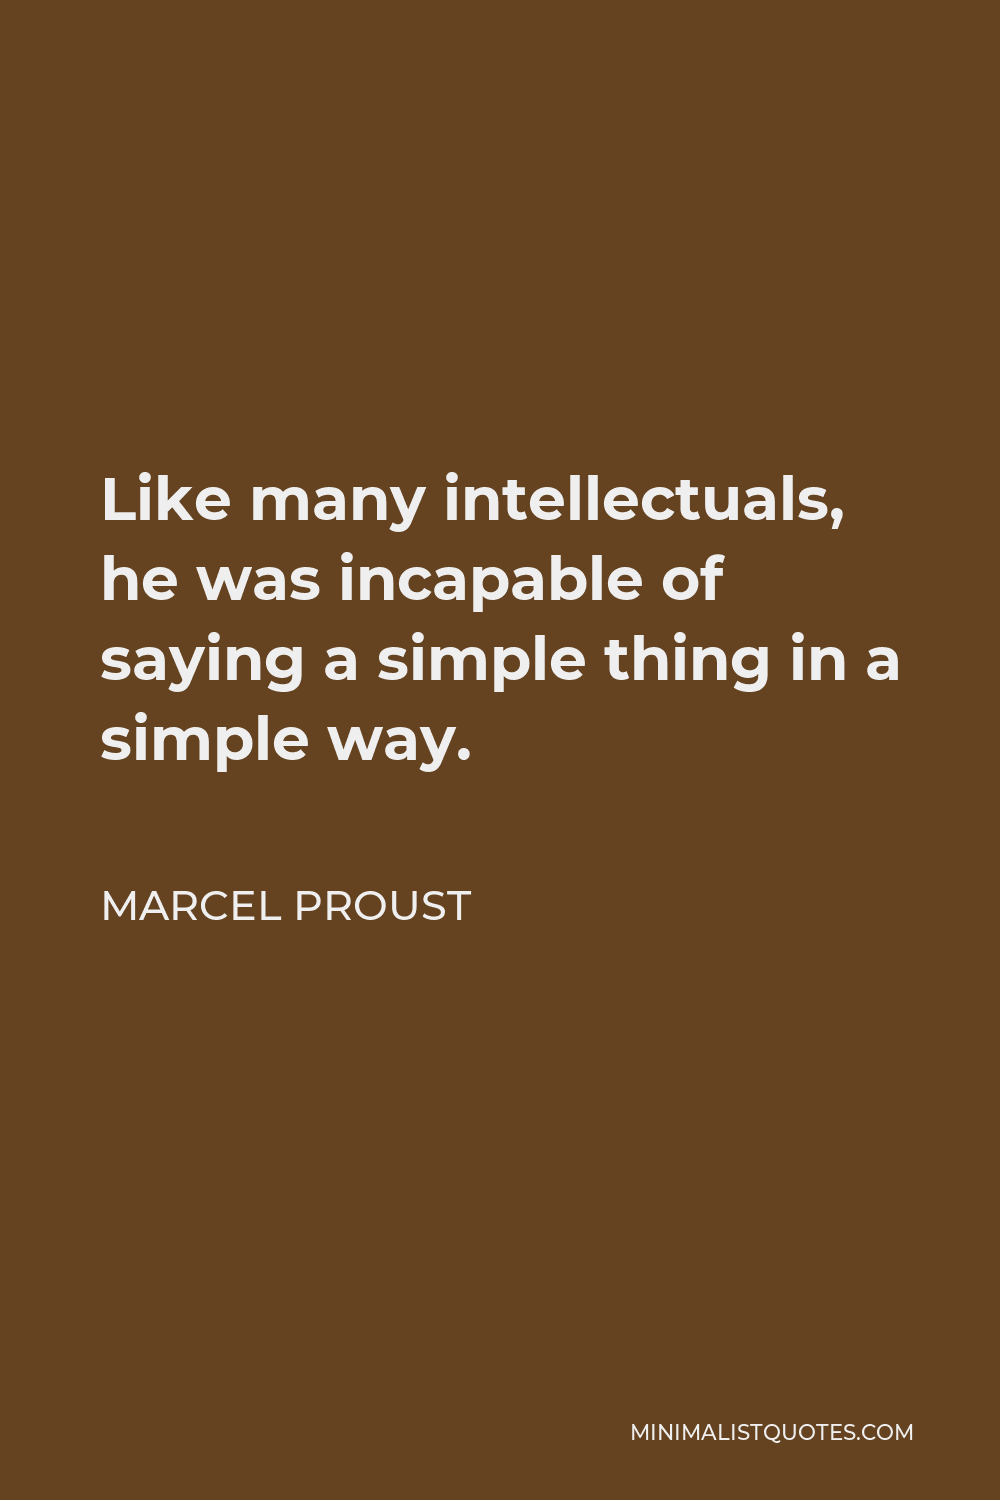 Marcel Proust Quote - Like many intellectuals, he was incapable of saying a simple thing in a simple way.